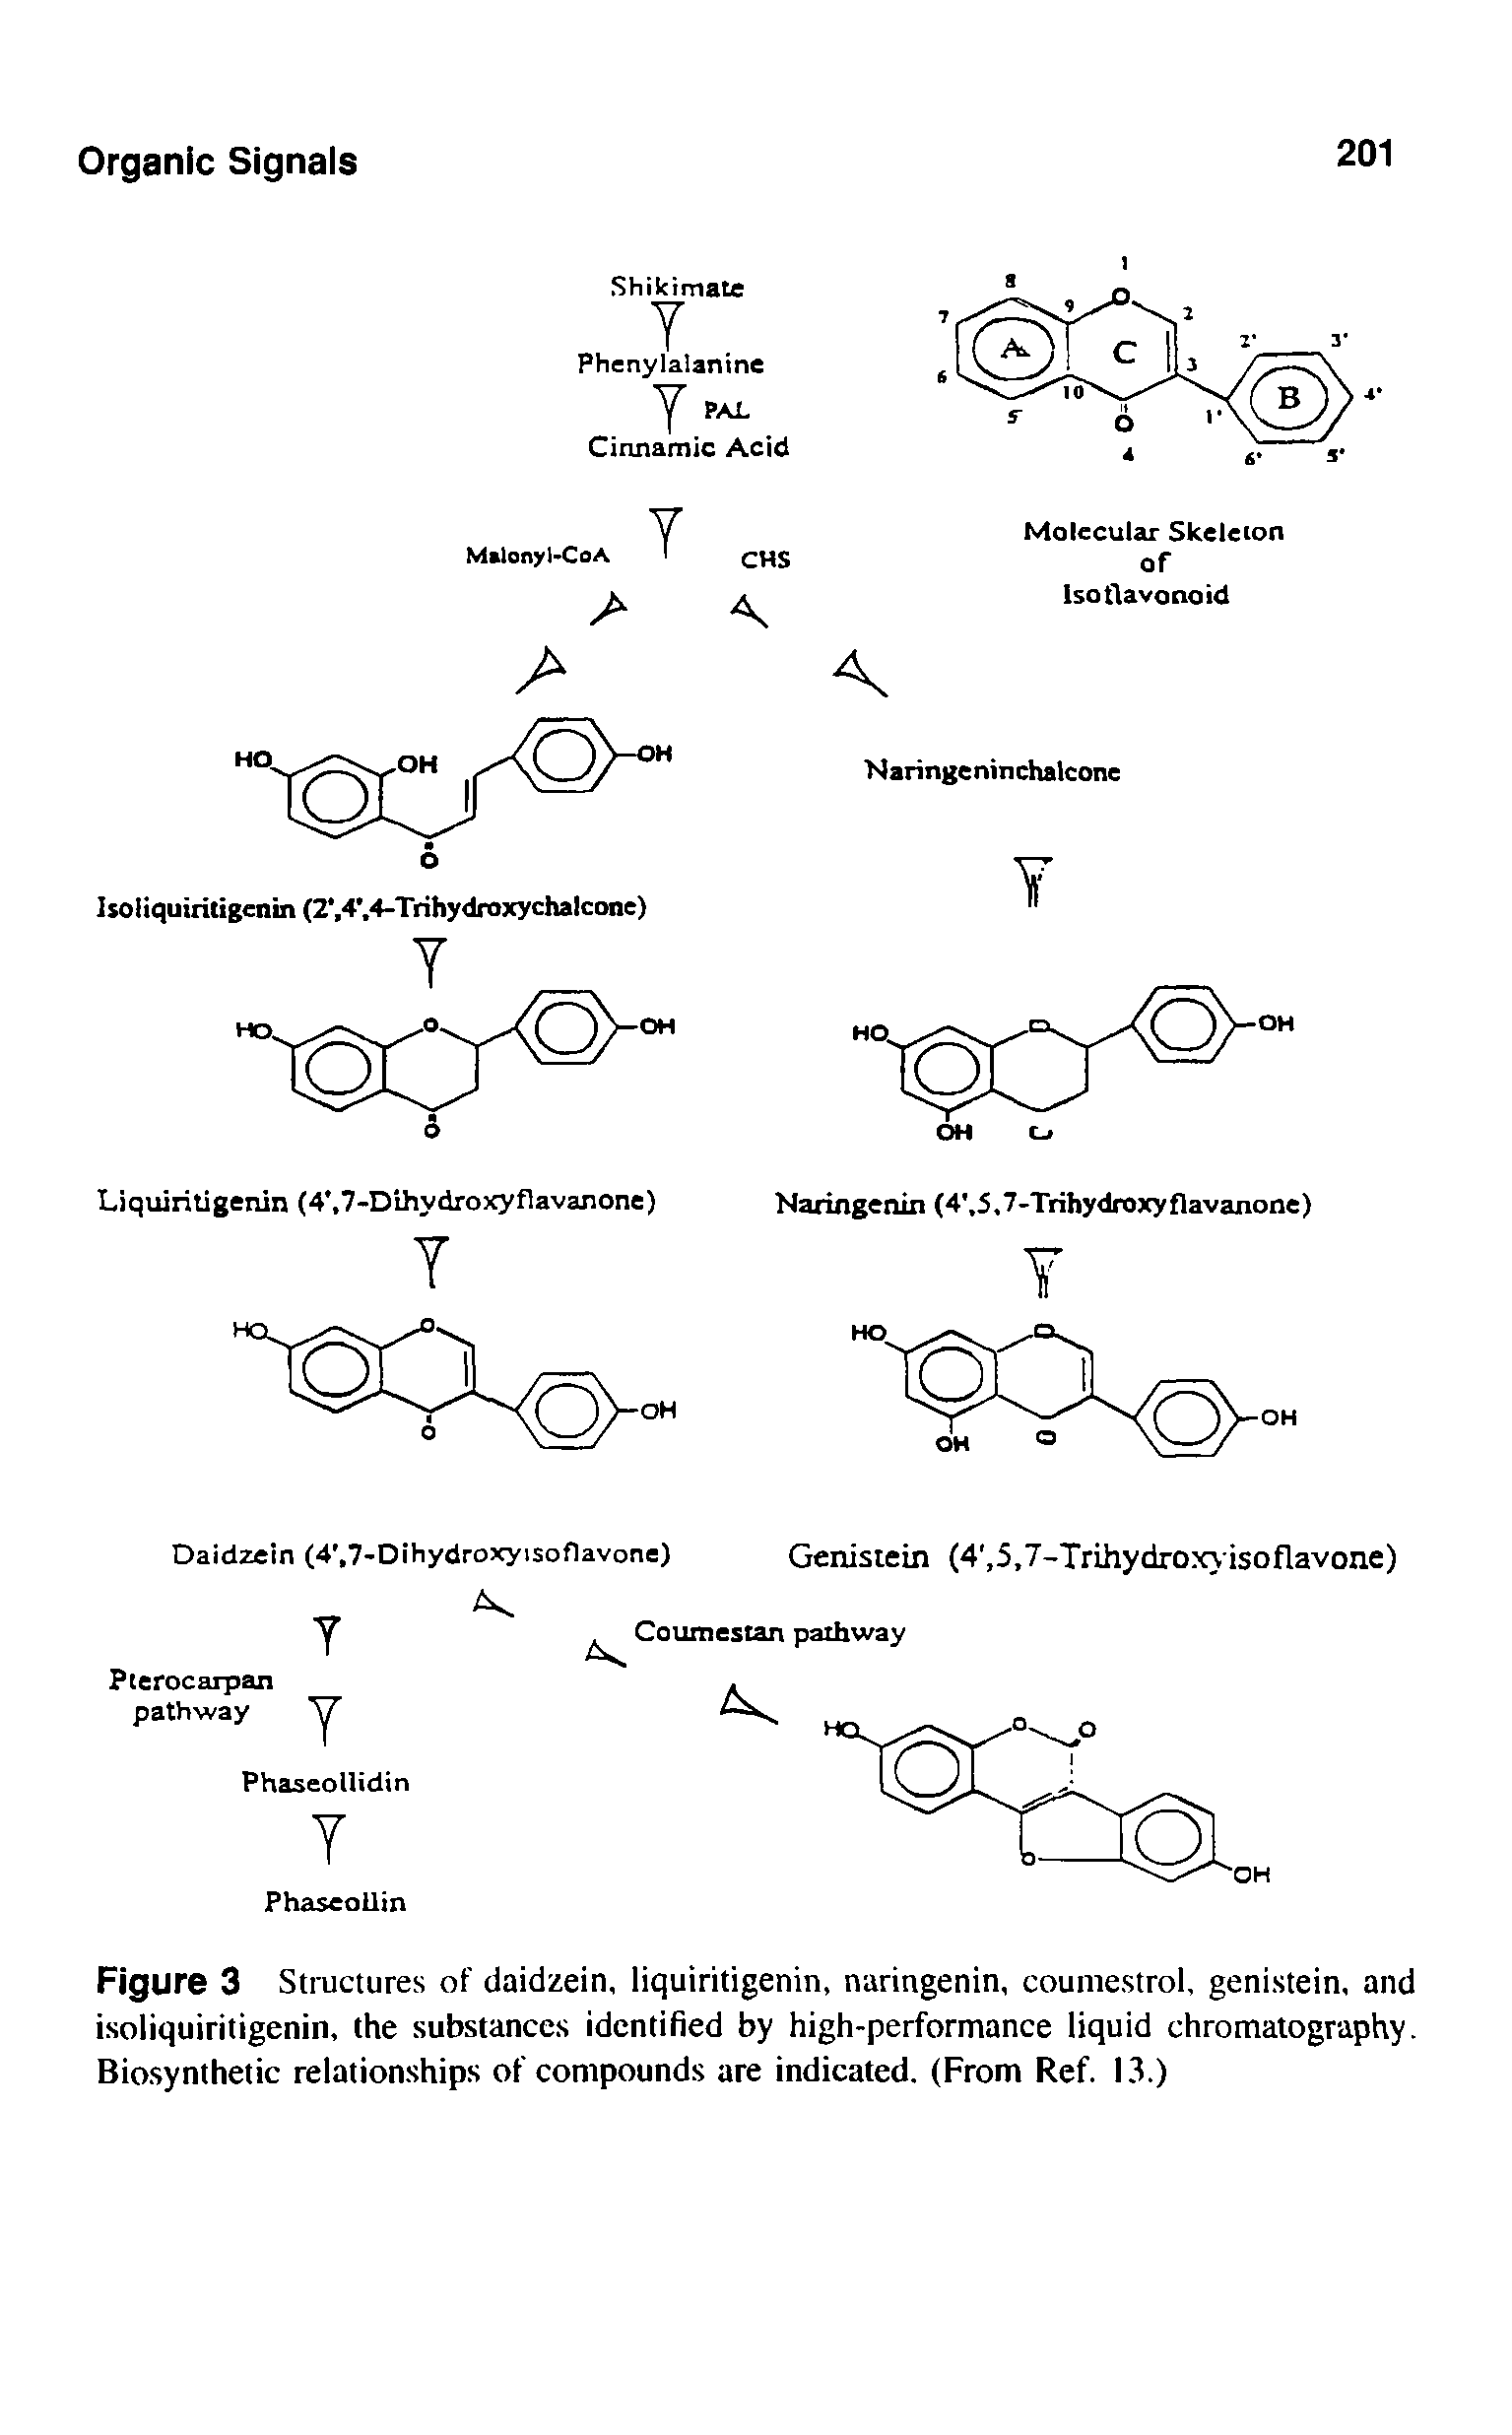 Figure 3 Structures of daidzein, liquiritigenin, naringenin, couniestrol, genistein, and isoiiquiritigenin, the substances identified by high-performance liquid chromatography. Biosynthetic relationships of compounds are indicated. (From Ref. 13.)...